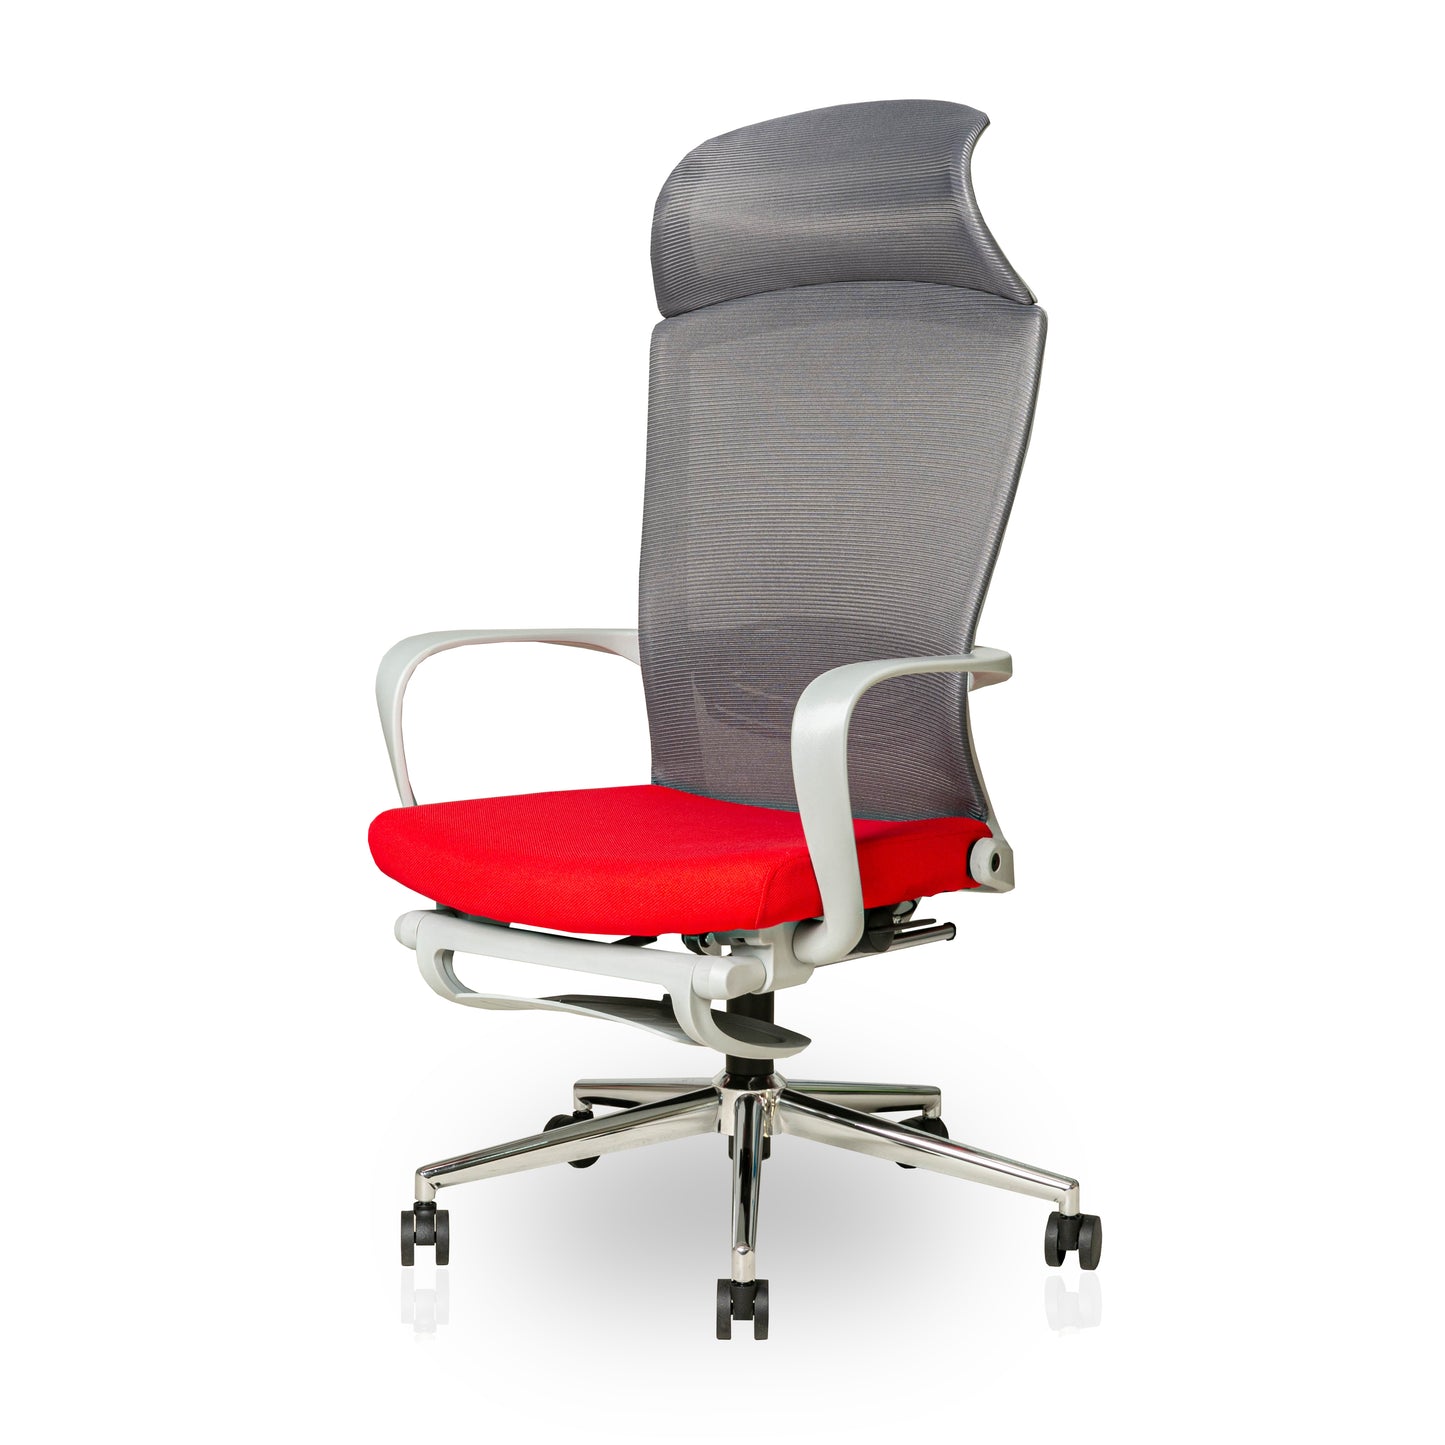 Load image into Gallery viewer, Caspian Chair with Headrest and Footrest - ContractWorld Furniture